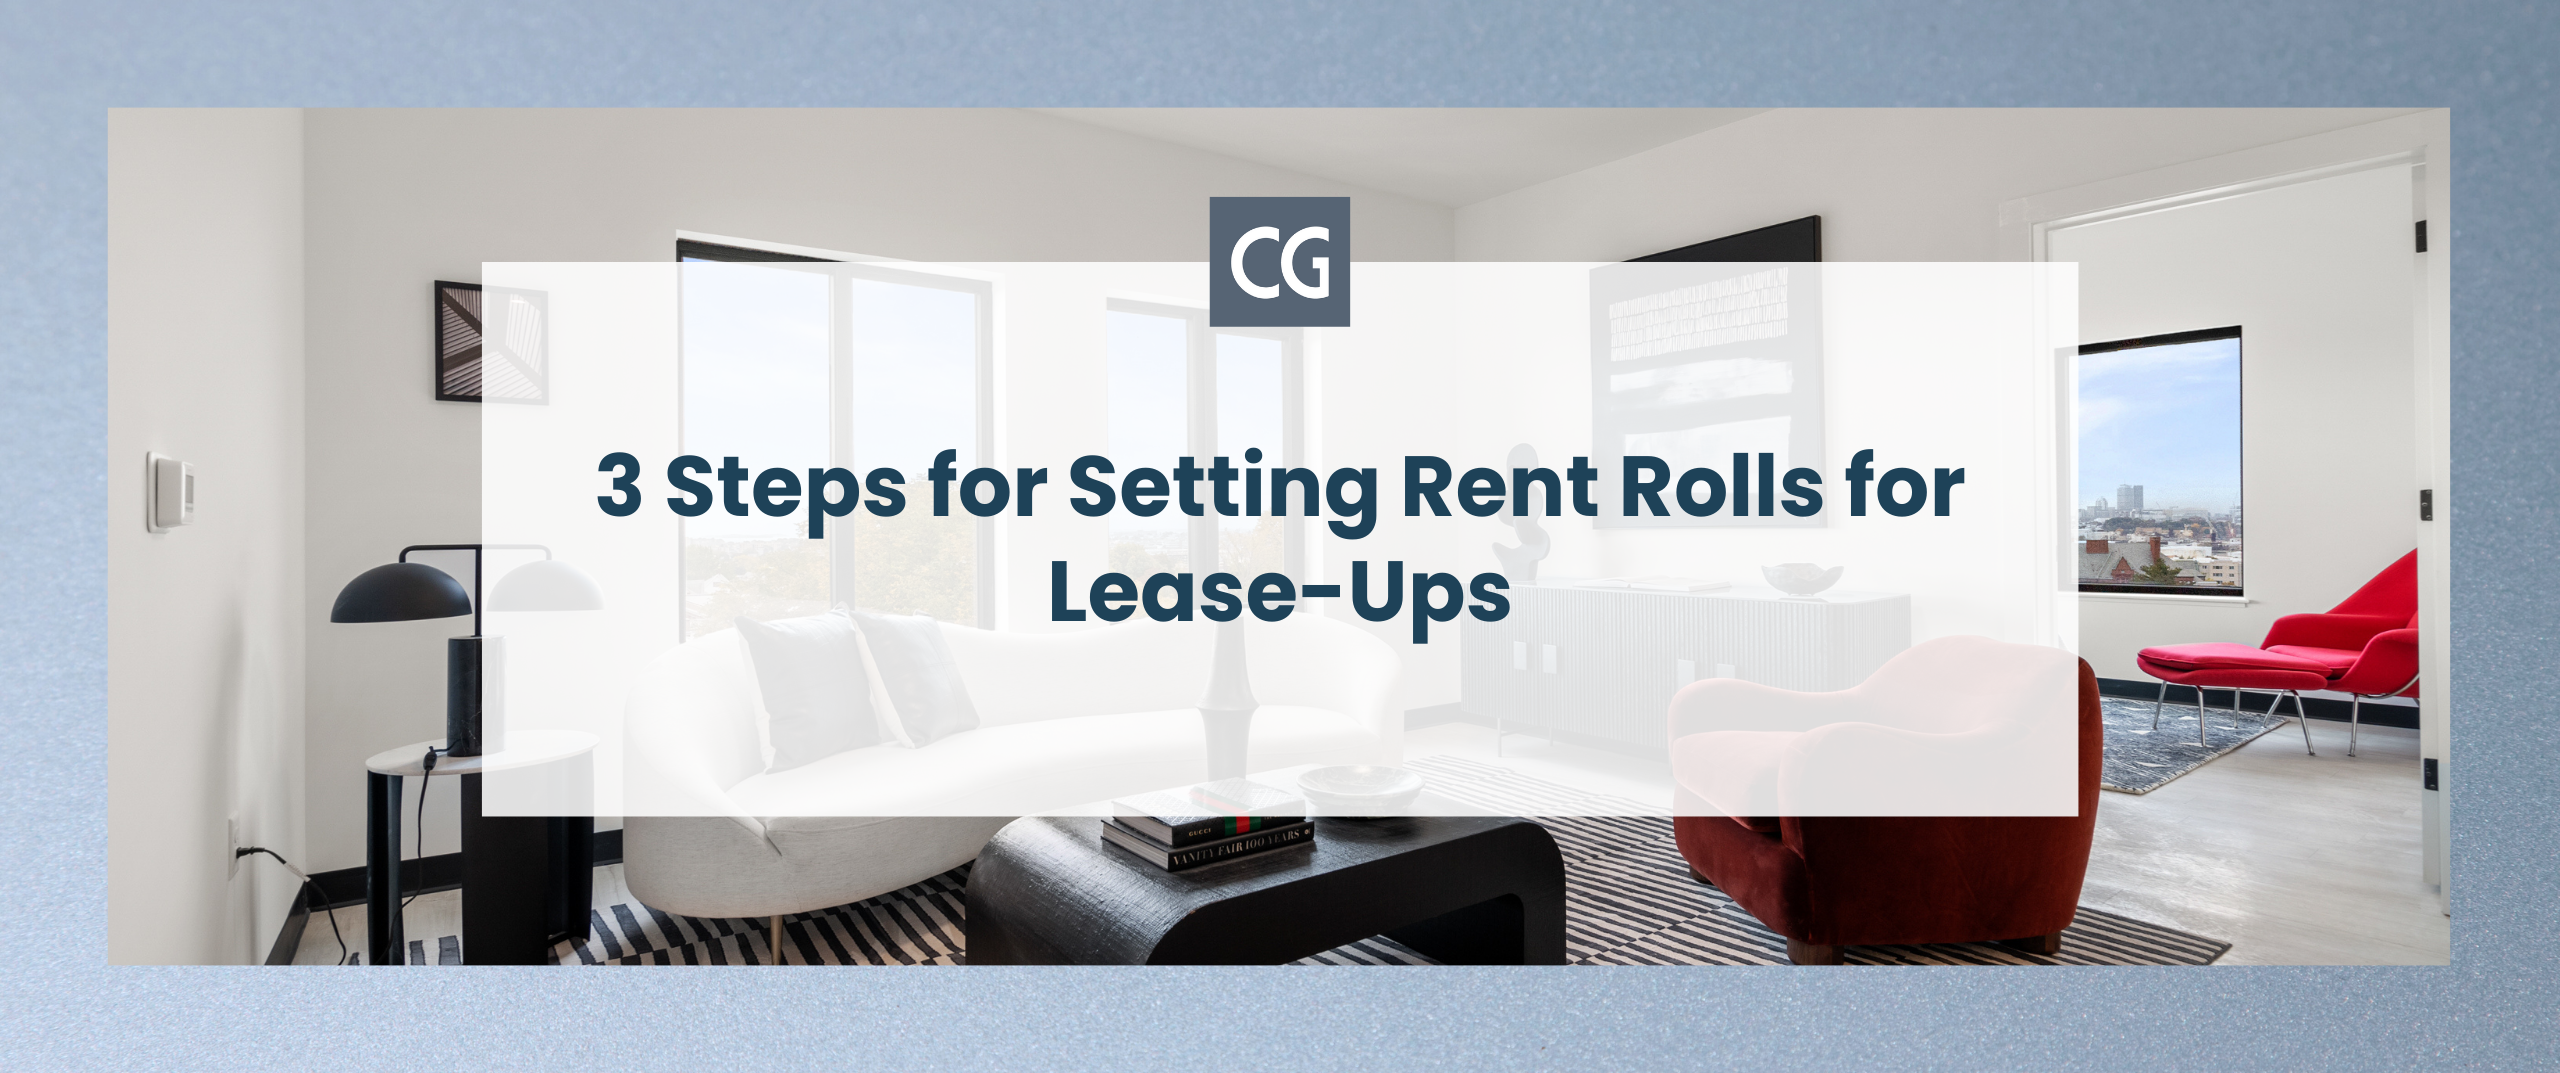 3 Steps for Setting Rent Rolls for Lease-Ups